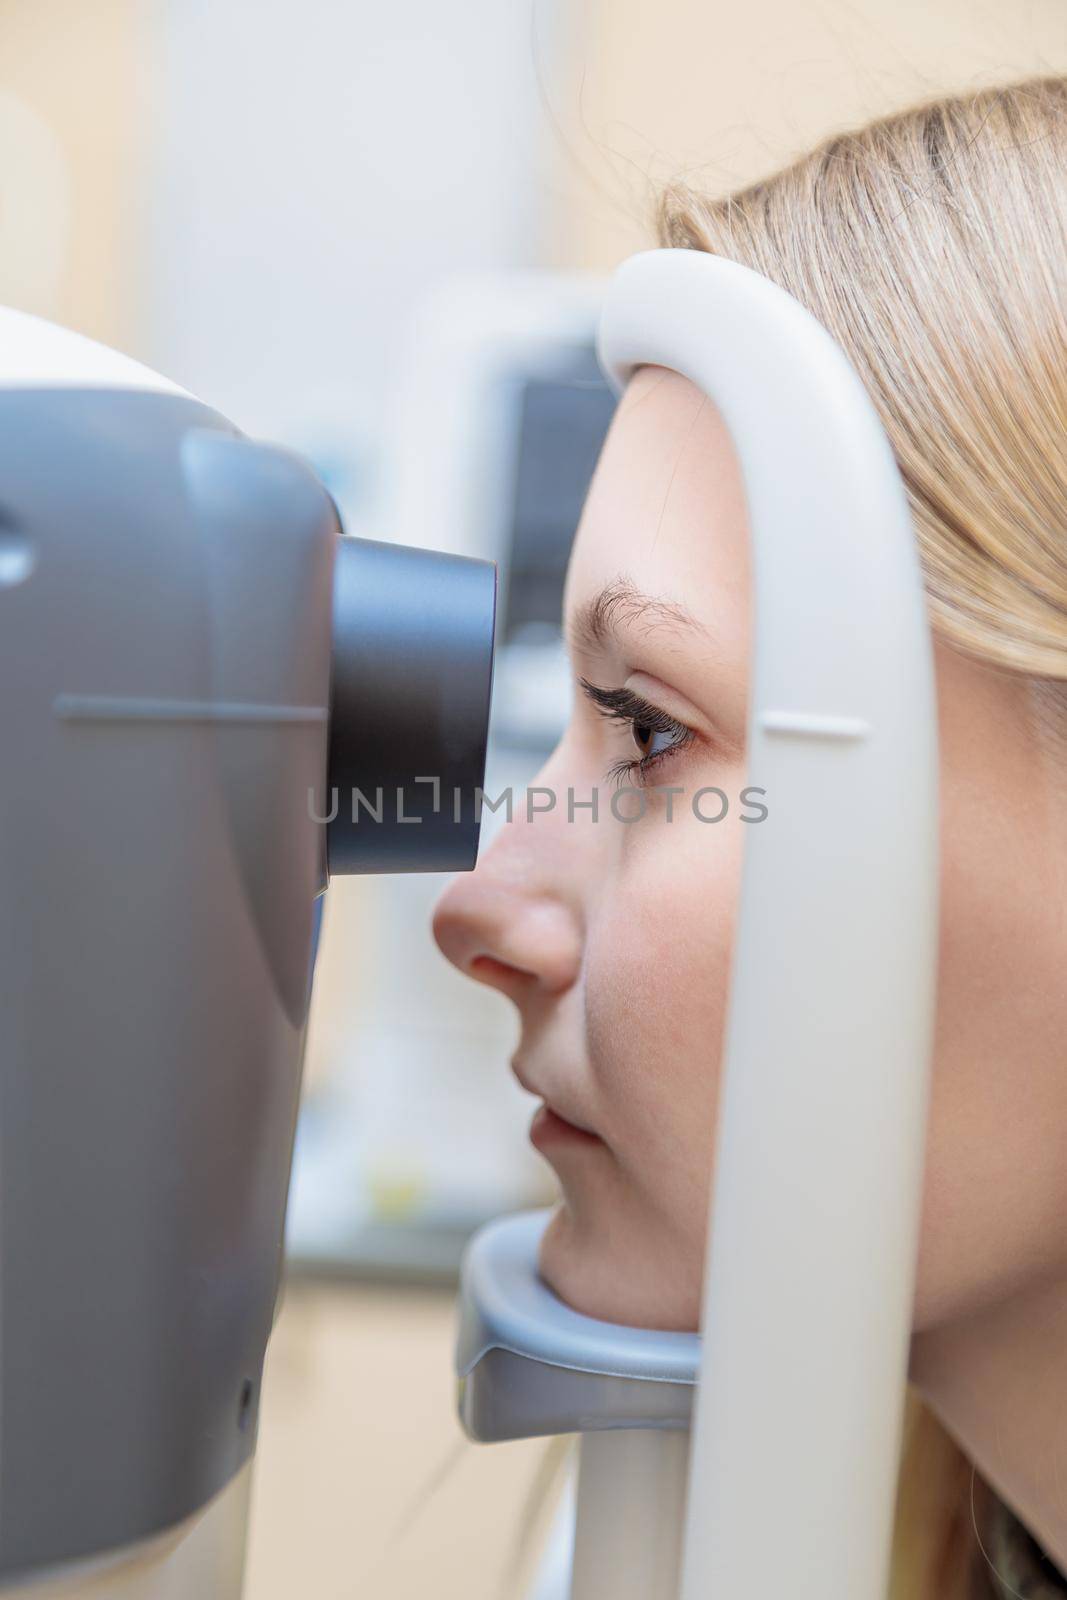 A young girl at the reception at the ophthalmologist checks her eyesight on a special apparatus. Close-up by Yurich32